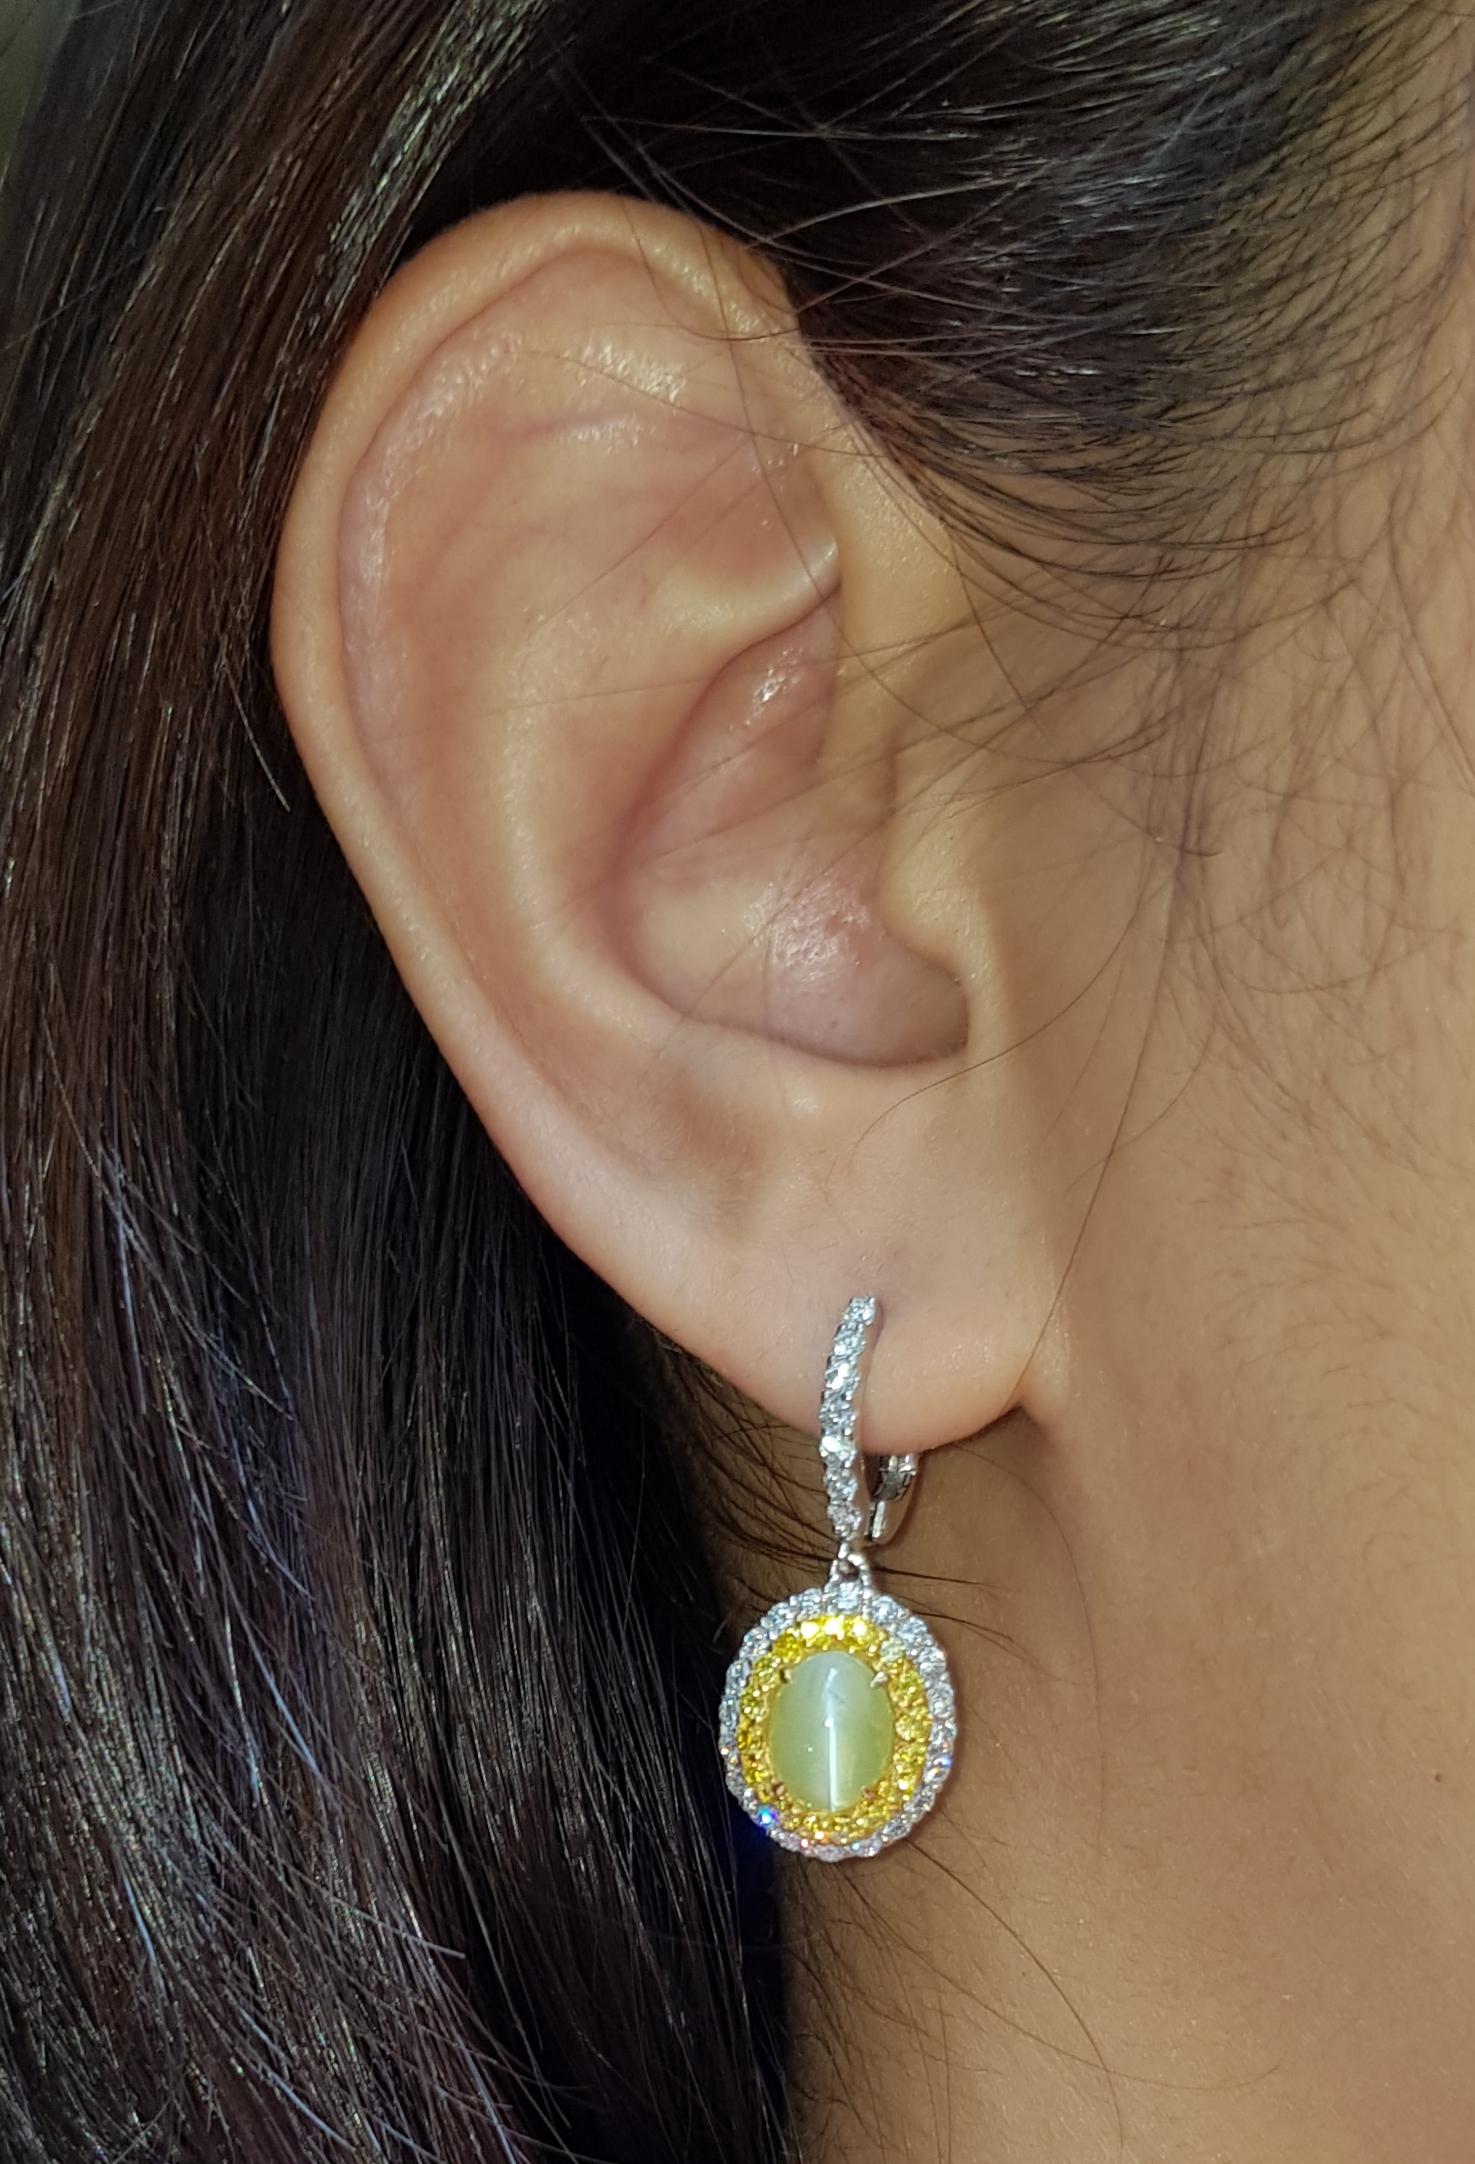 Cat's Eye 3.82 carats with Diamond 0.94 carat and Yellow Diamond 0.60 carat Earrings set in 18 Karat White Gold Settings

Width:  1.2 cm 
Length: 2.8 cm
Total Weight: 6.66 grams

